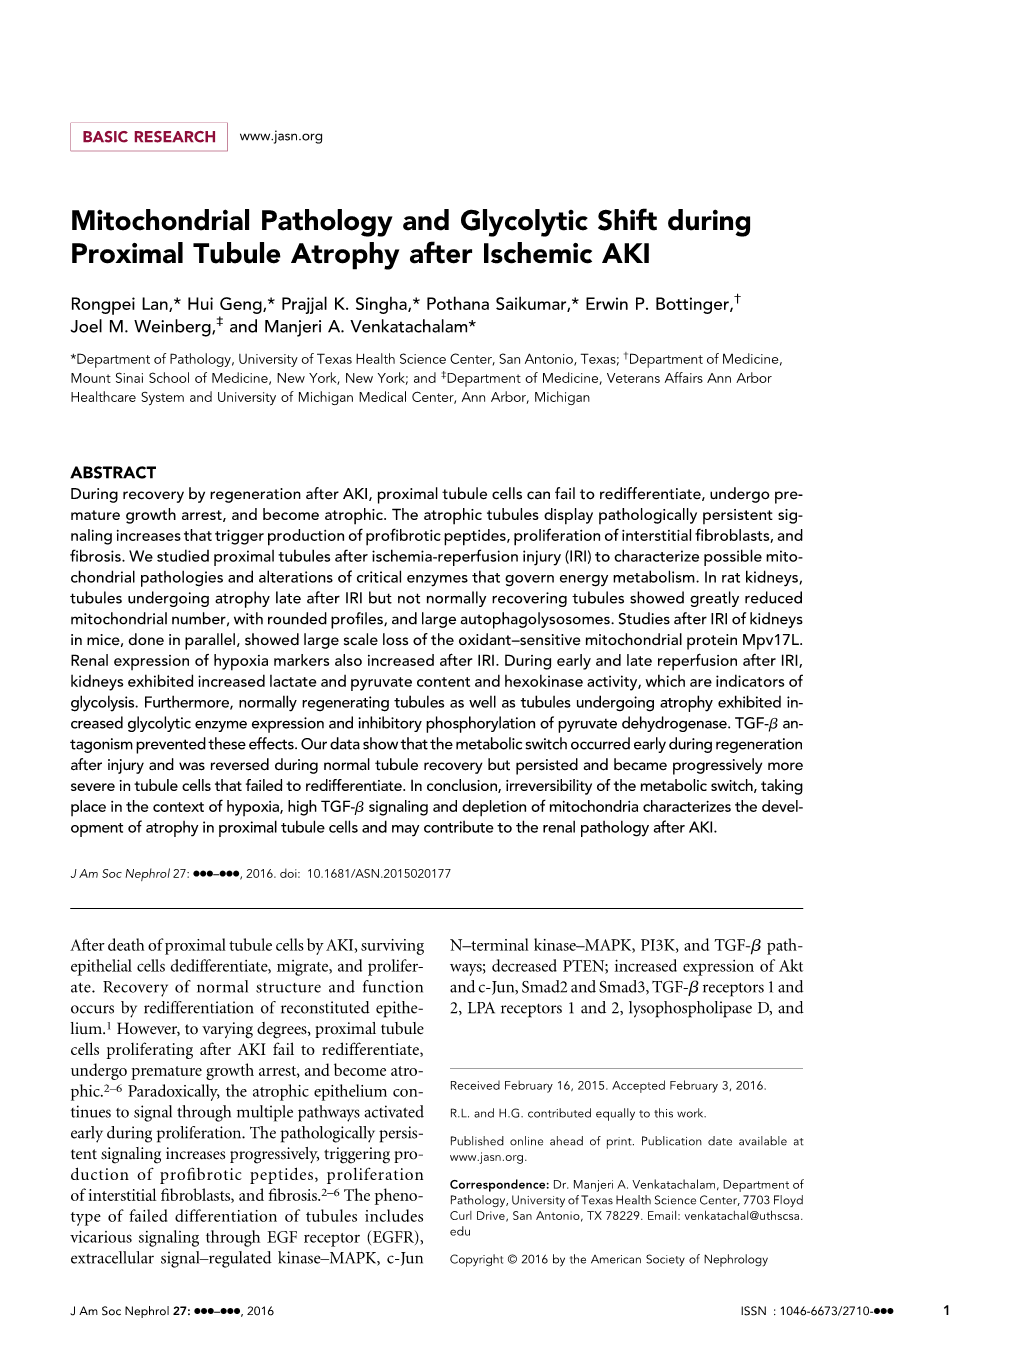 Mitochondrial Pathology and Glycolytic Shift During Proximal Tubule Atrophy After Ischemic AKI